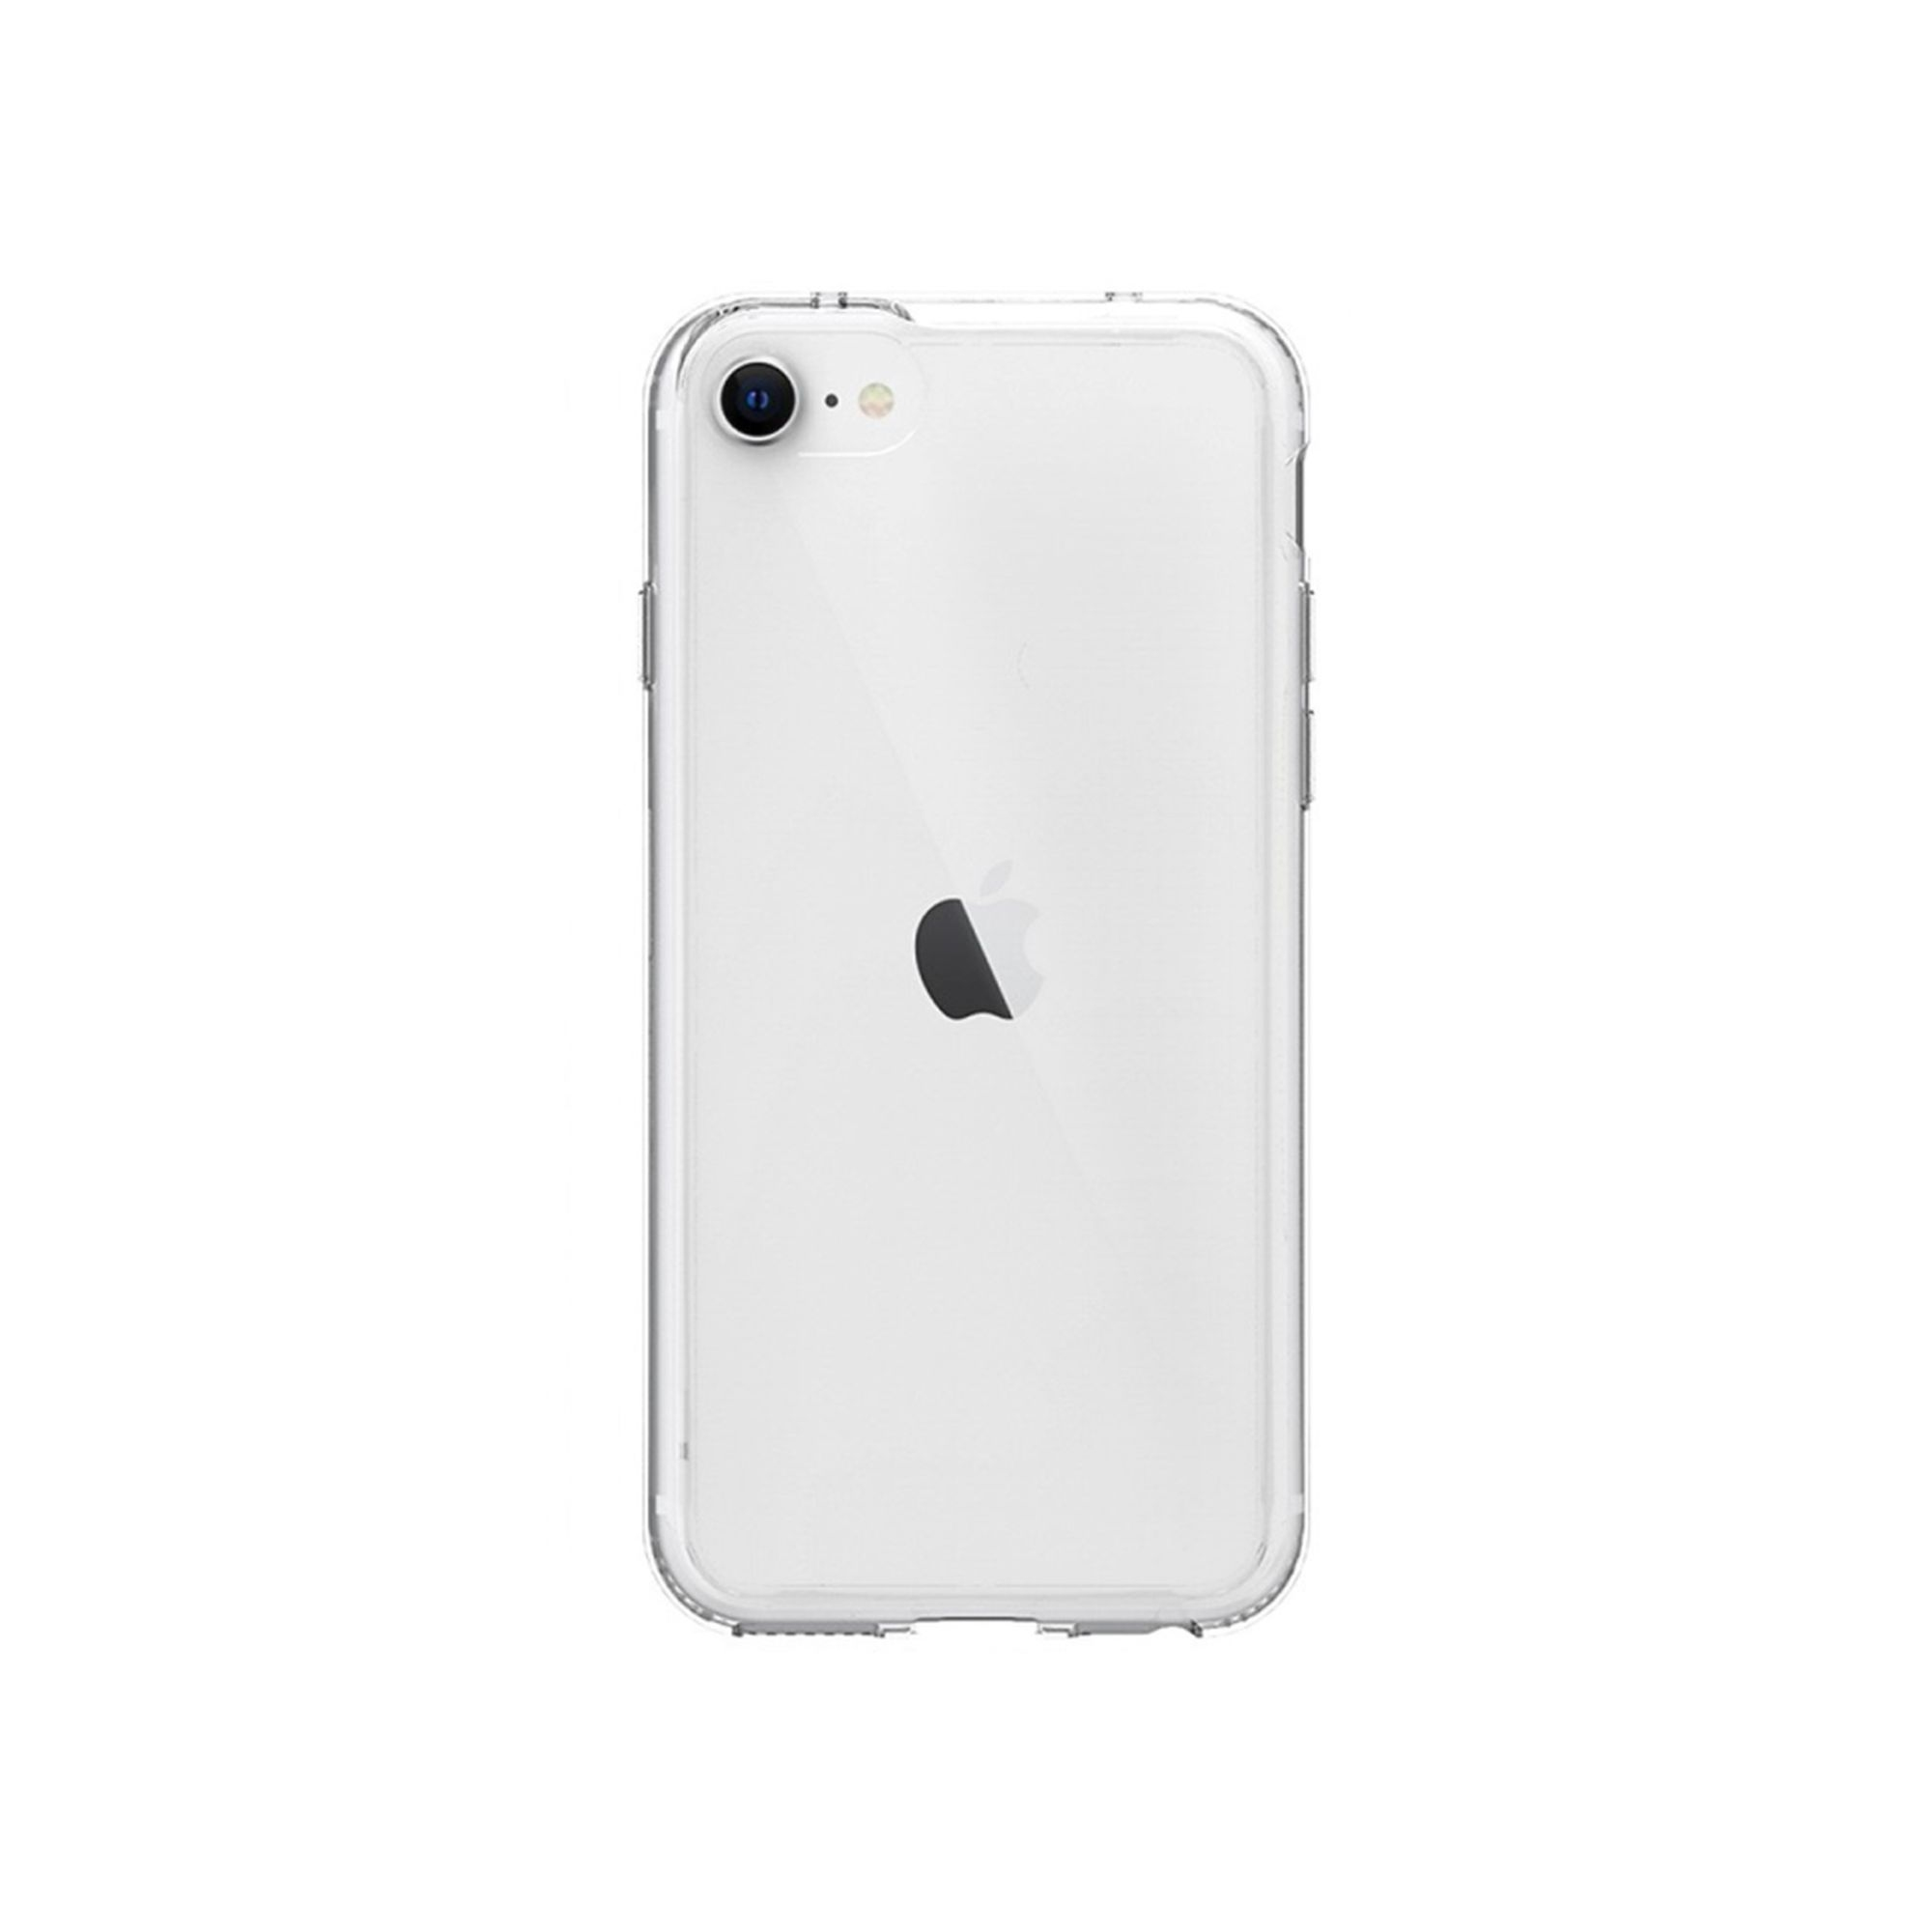 Backcover, BERLIN Clear, (2020) SE 8 transparent iPhone Pankow Apple, / / JT 7,